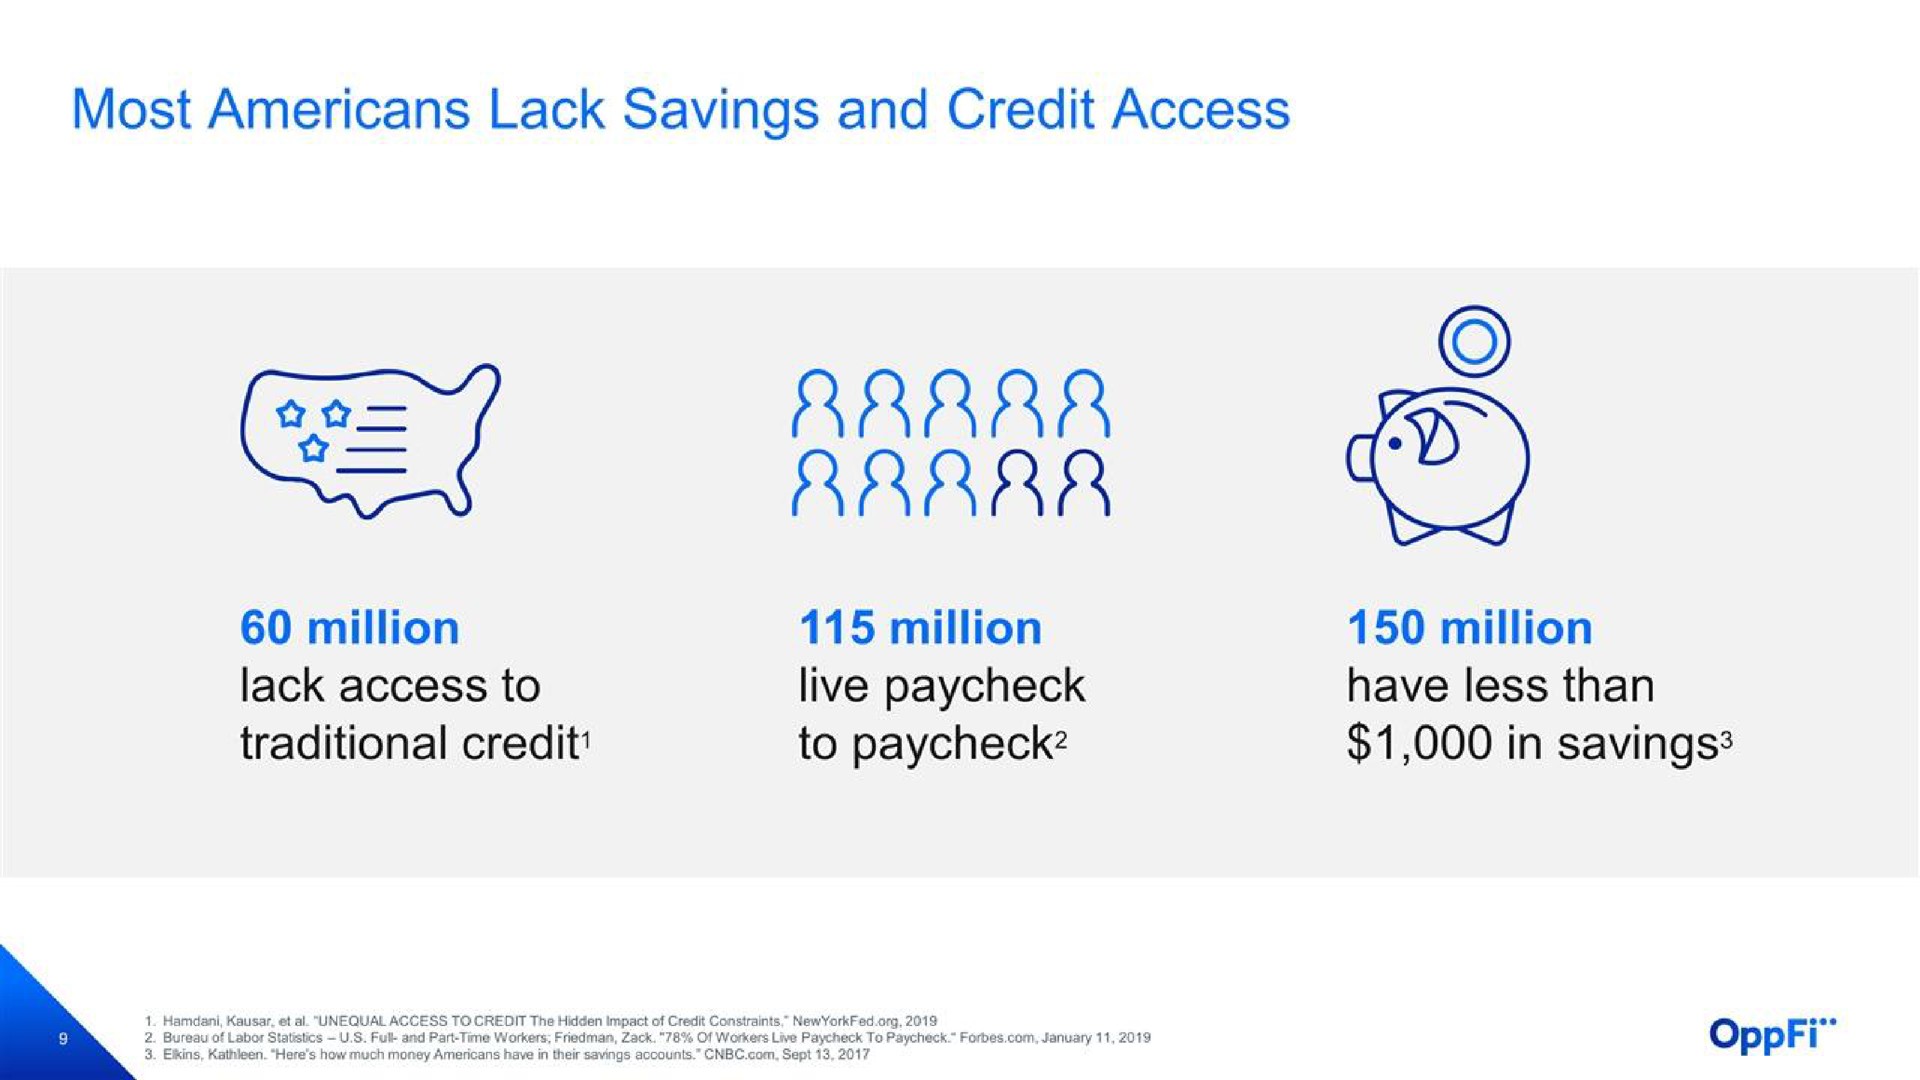 most lack savings and credit access | OppFi